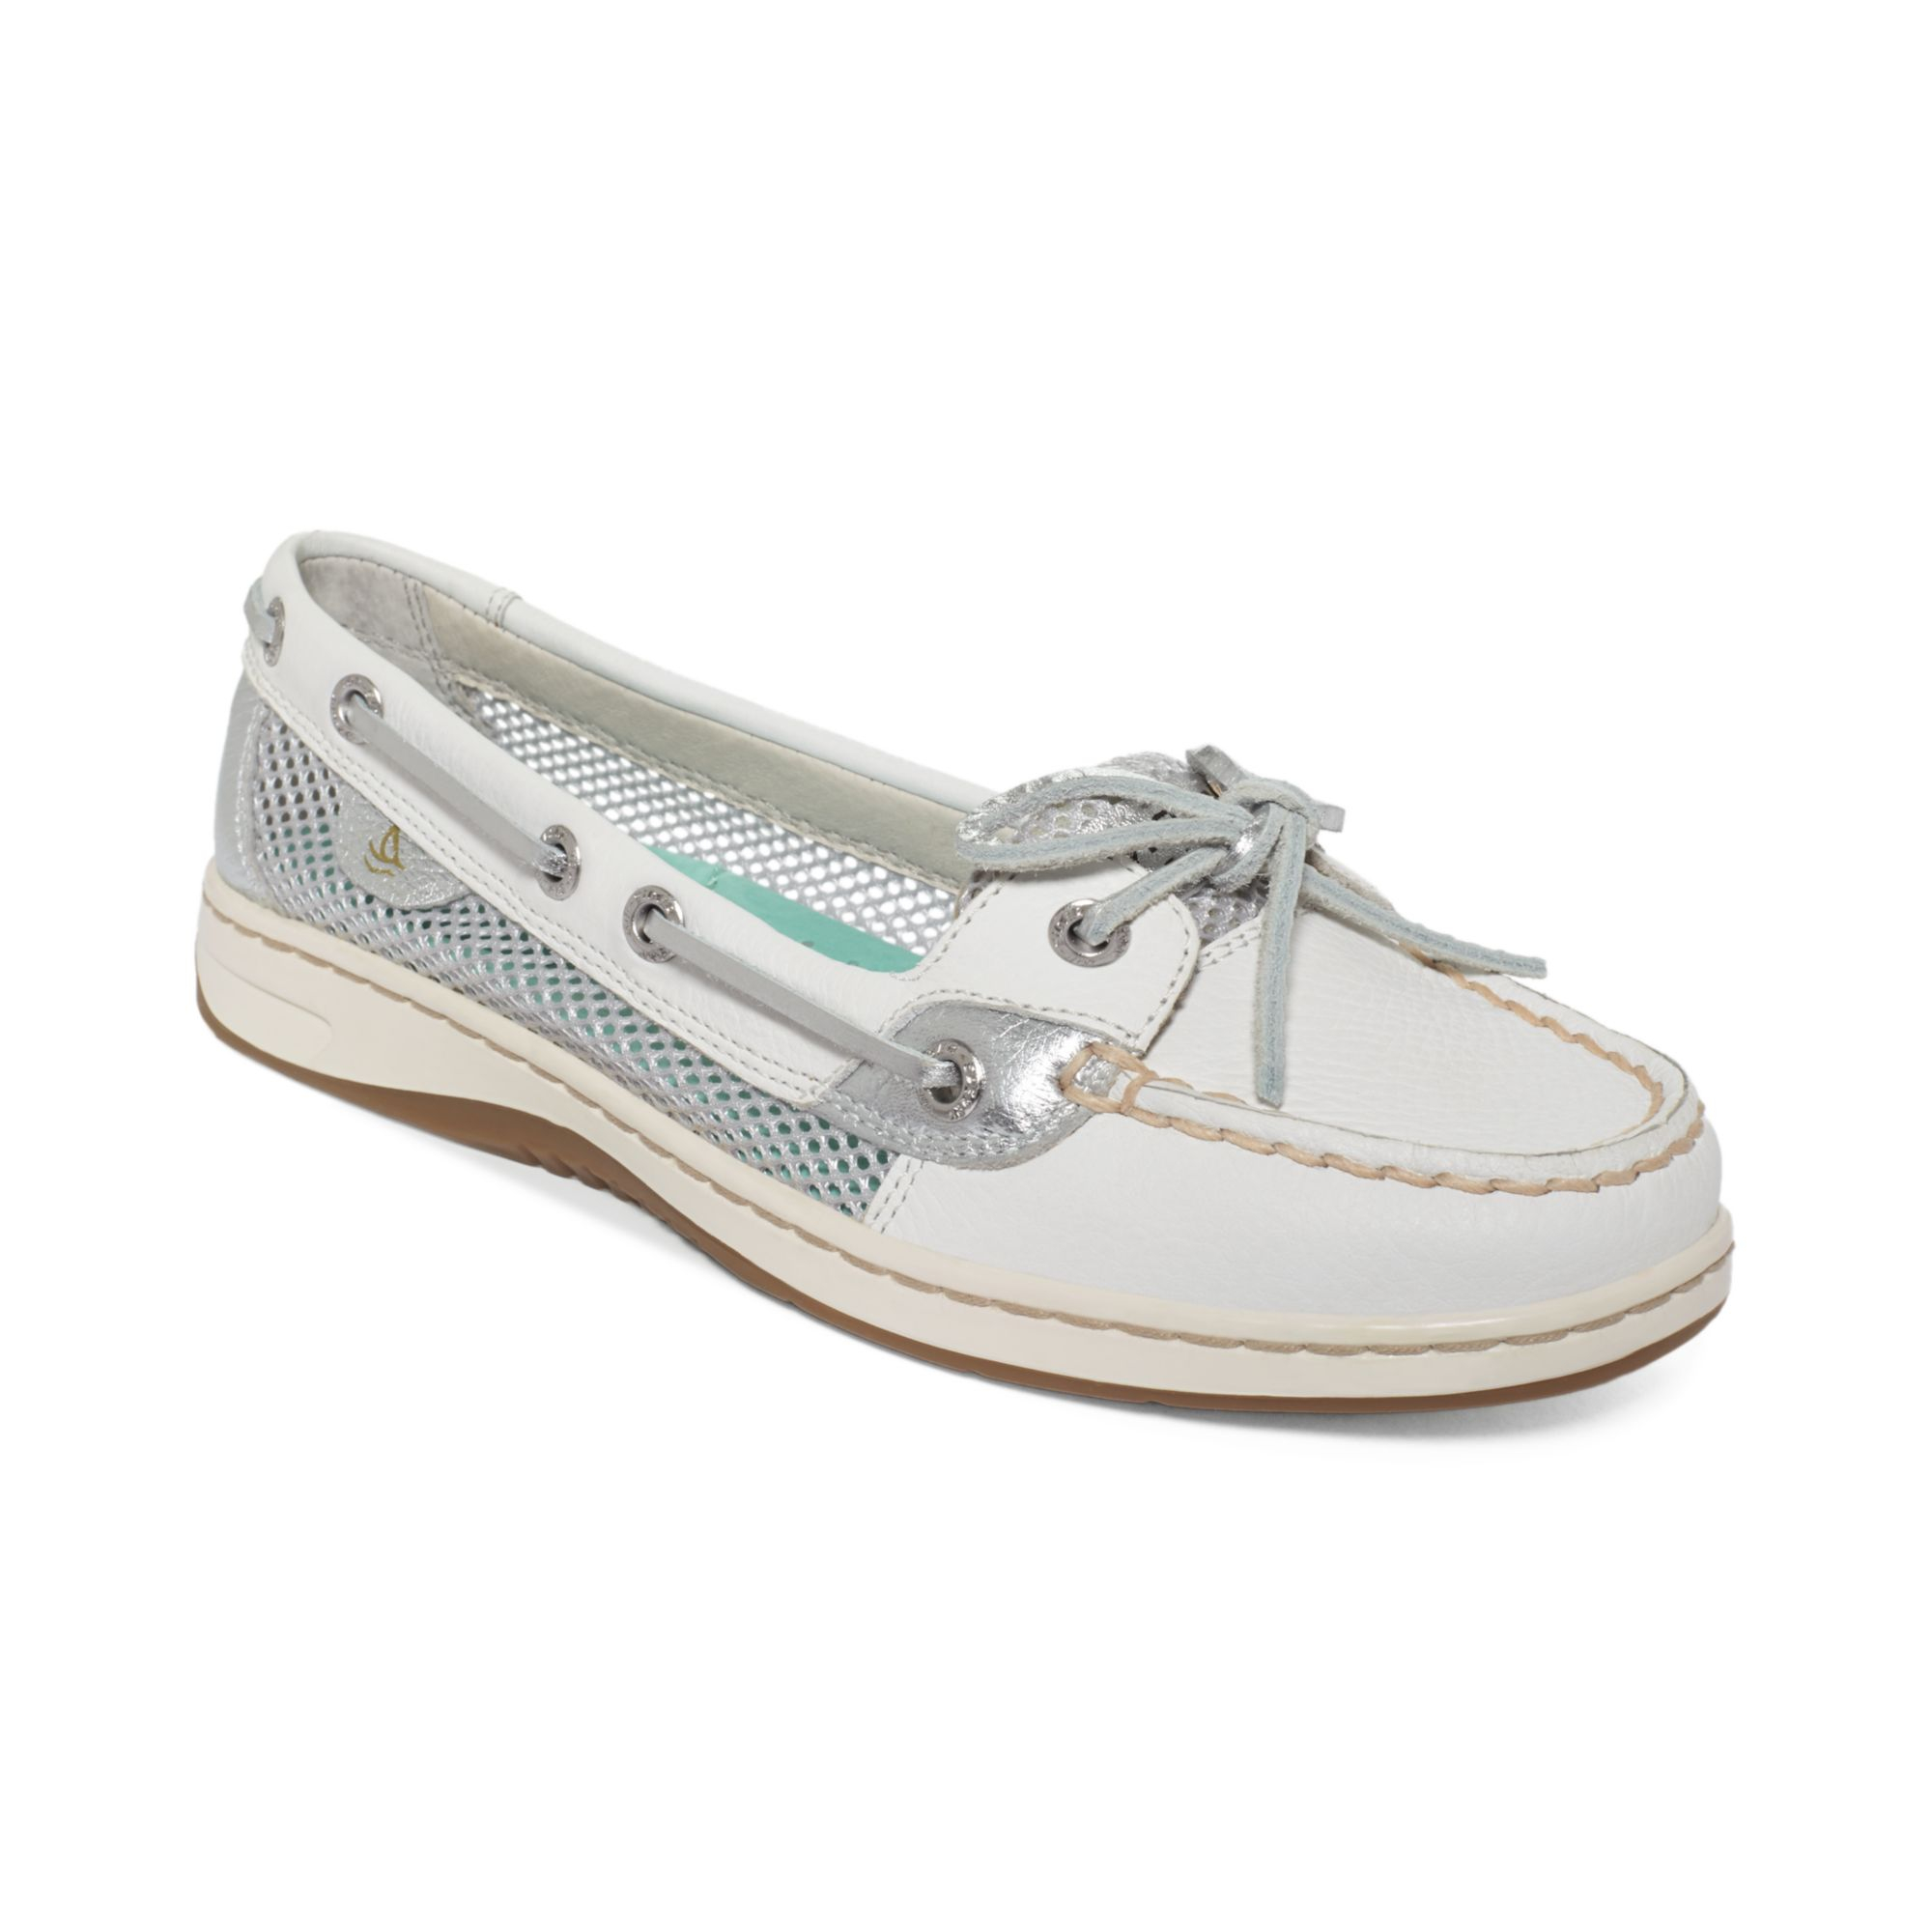 Sperry TopSider Womens Angelfish Boat Shoes in White Lyst